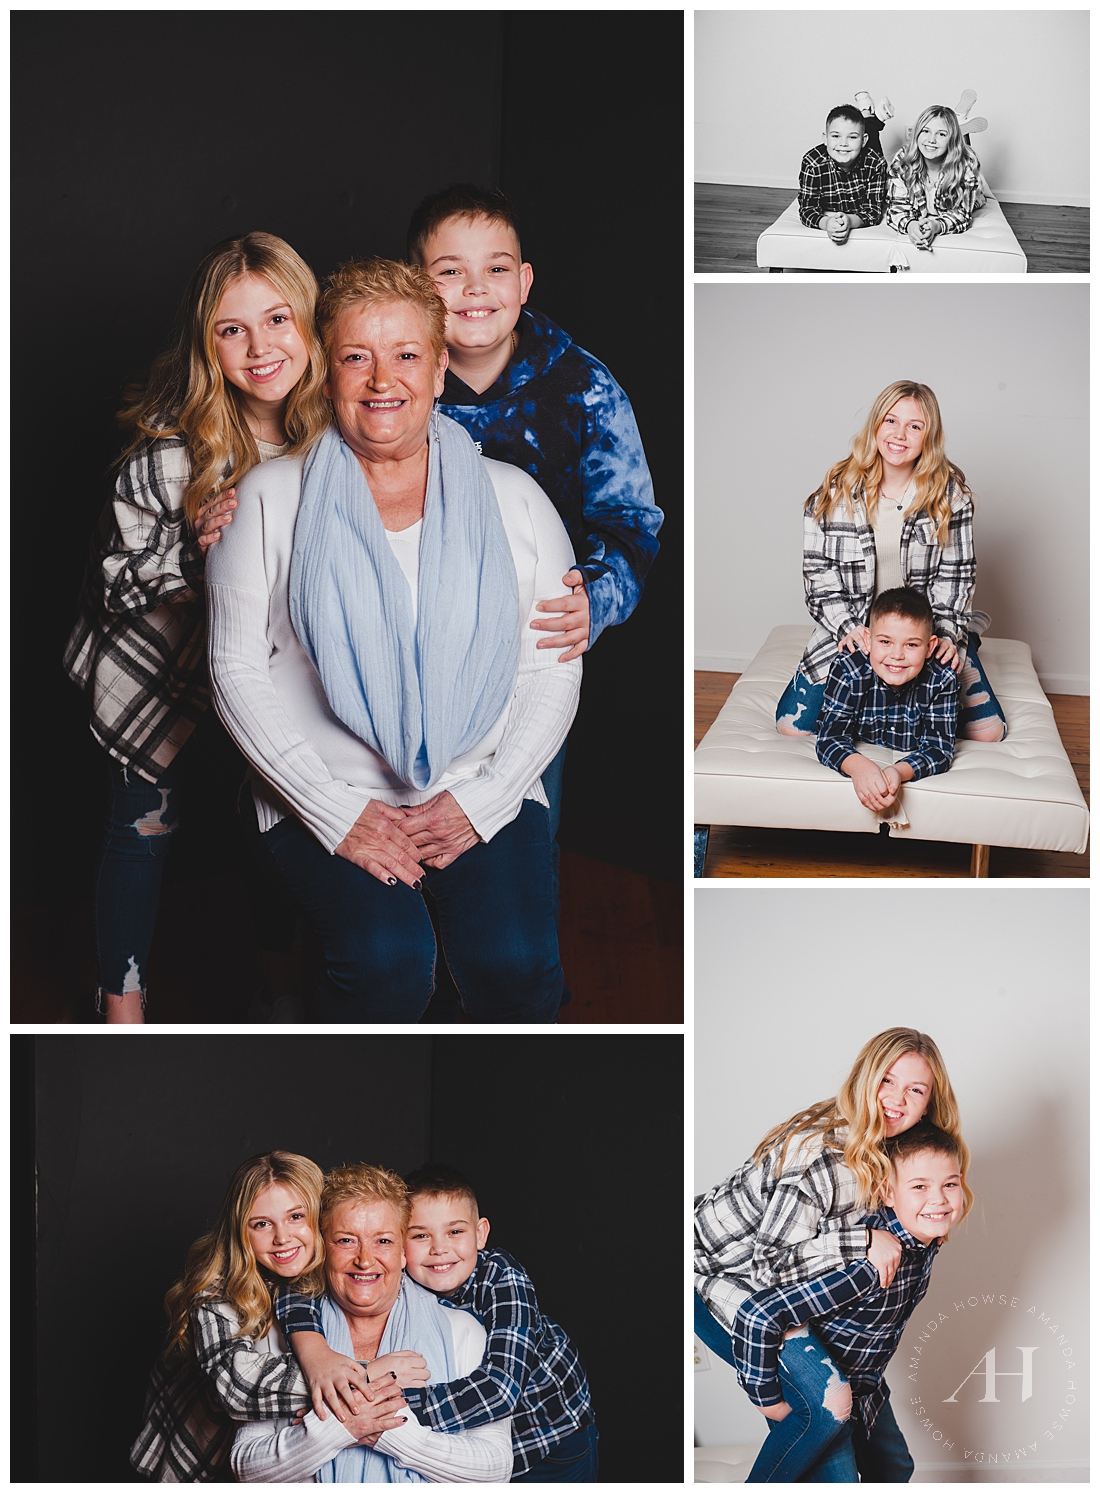 Adorable Pose Ideas For Siblings and Grandparents | Cute Studio253 Family Pictures | Photographed by the Best Tacoma, Washington Family Photographer Amanda Howse Photography